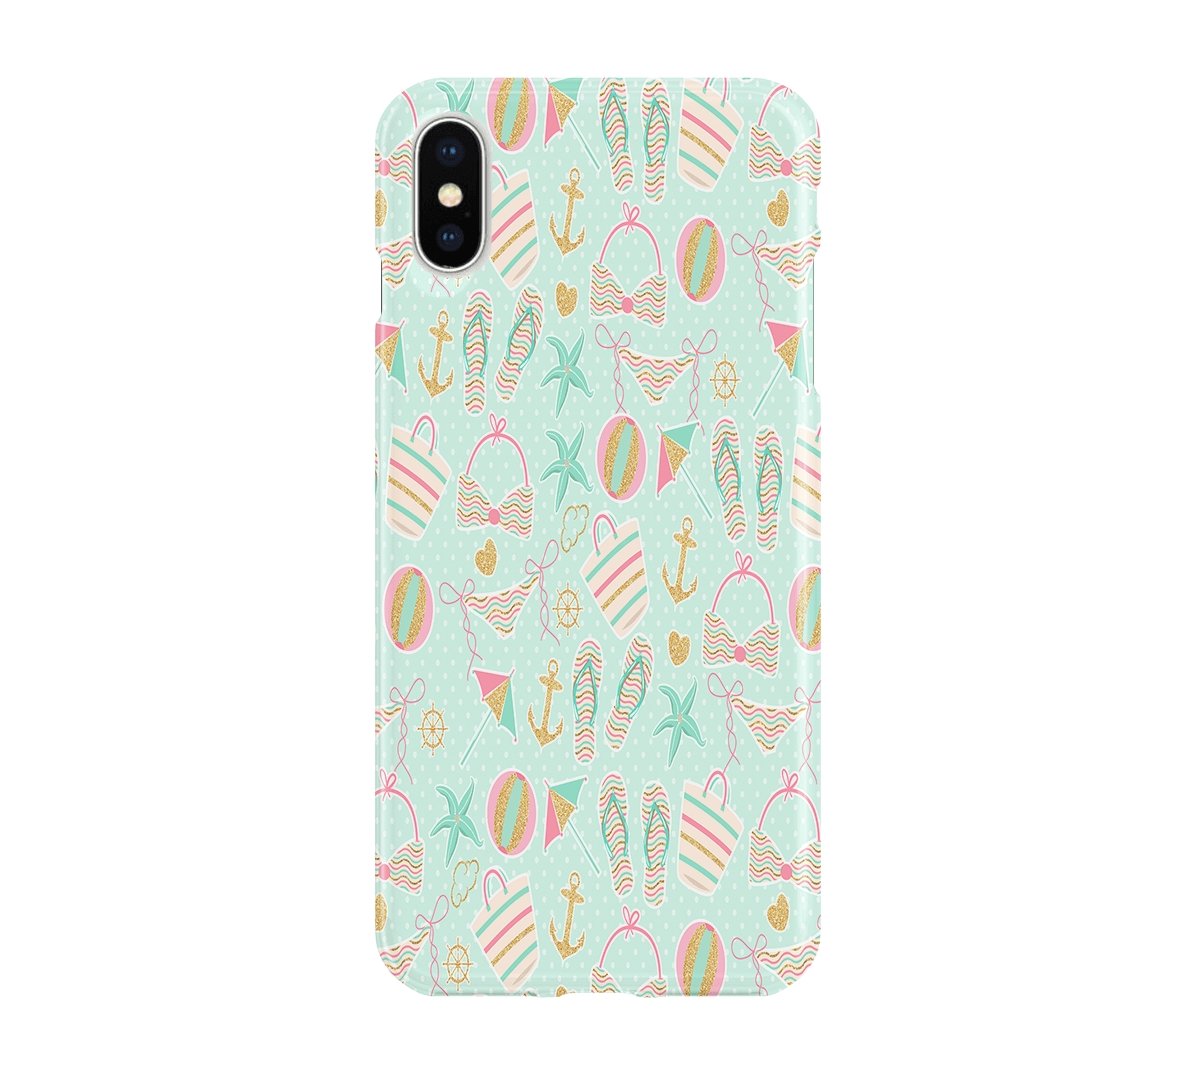 Beach Baby - iPhone phone case designs by CaseSwagger